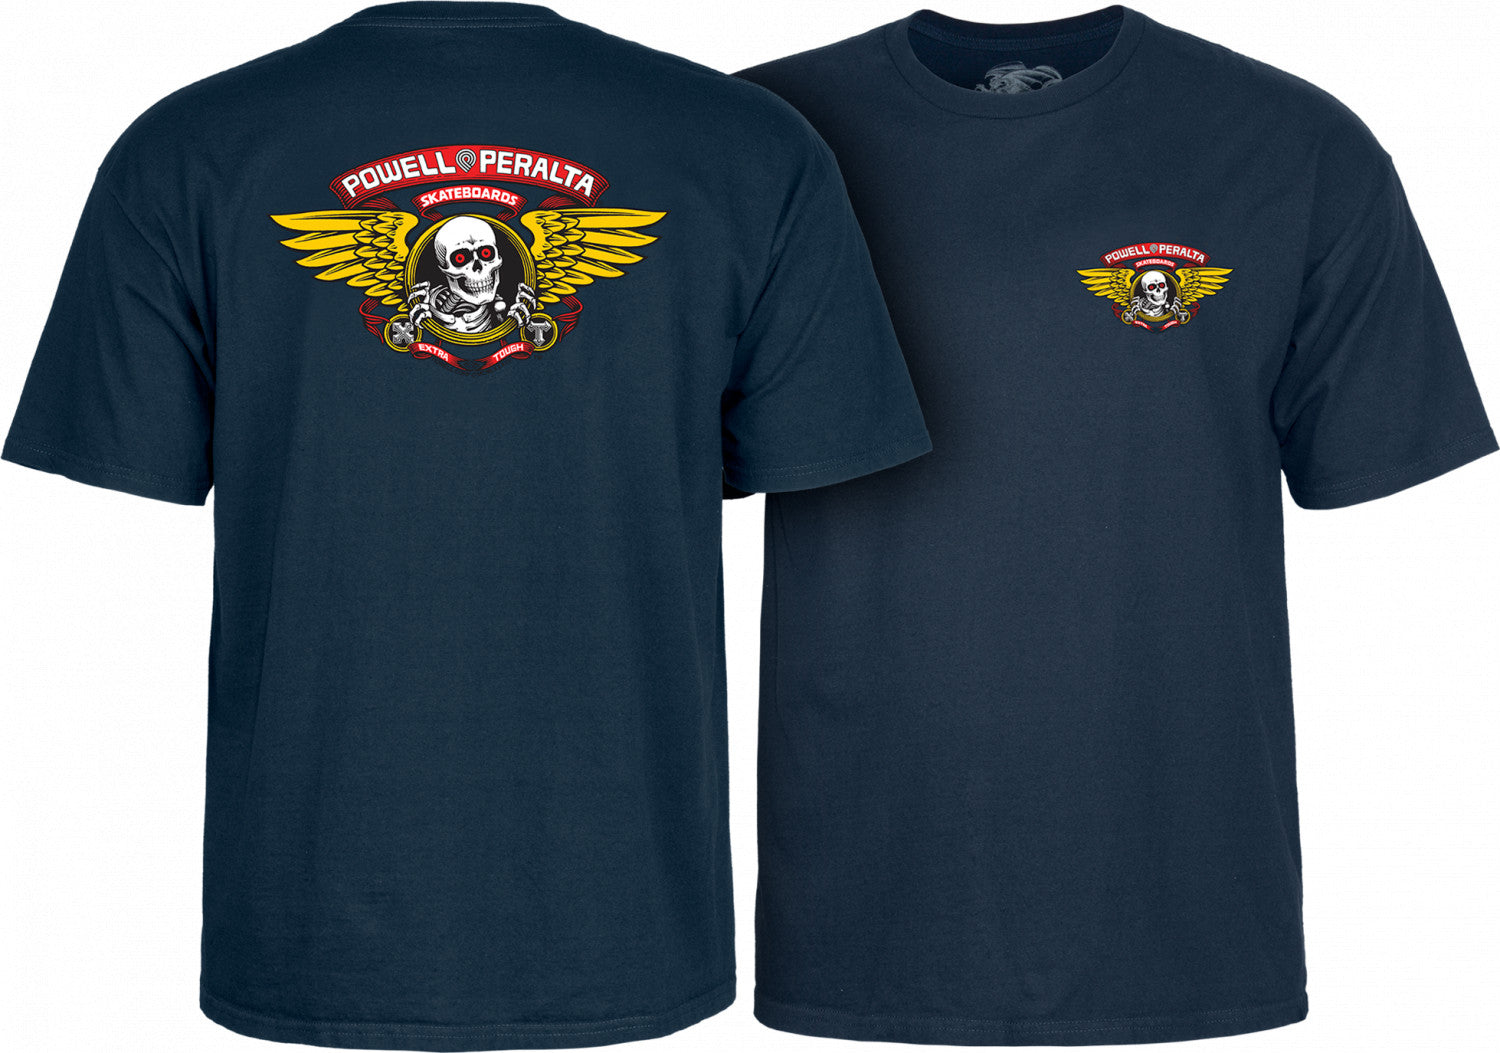 Powell Peralta Winged Ripper S/S Tee Navy M